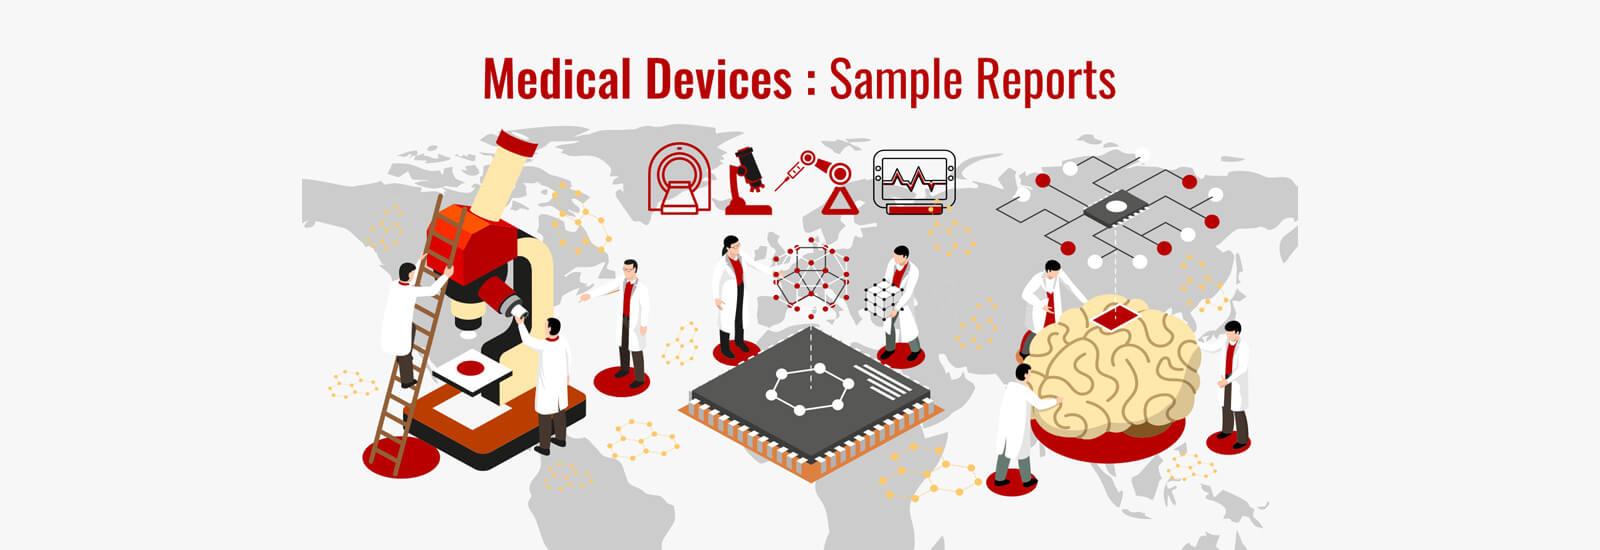 Medical Device - Wissen Research